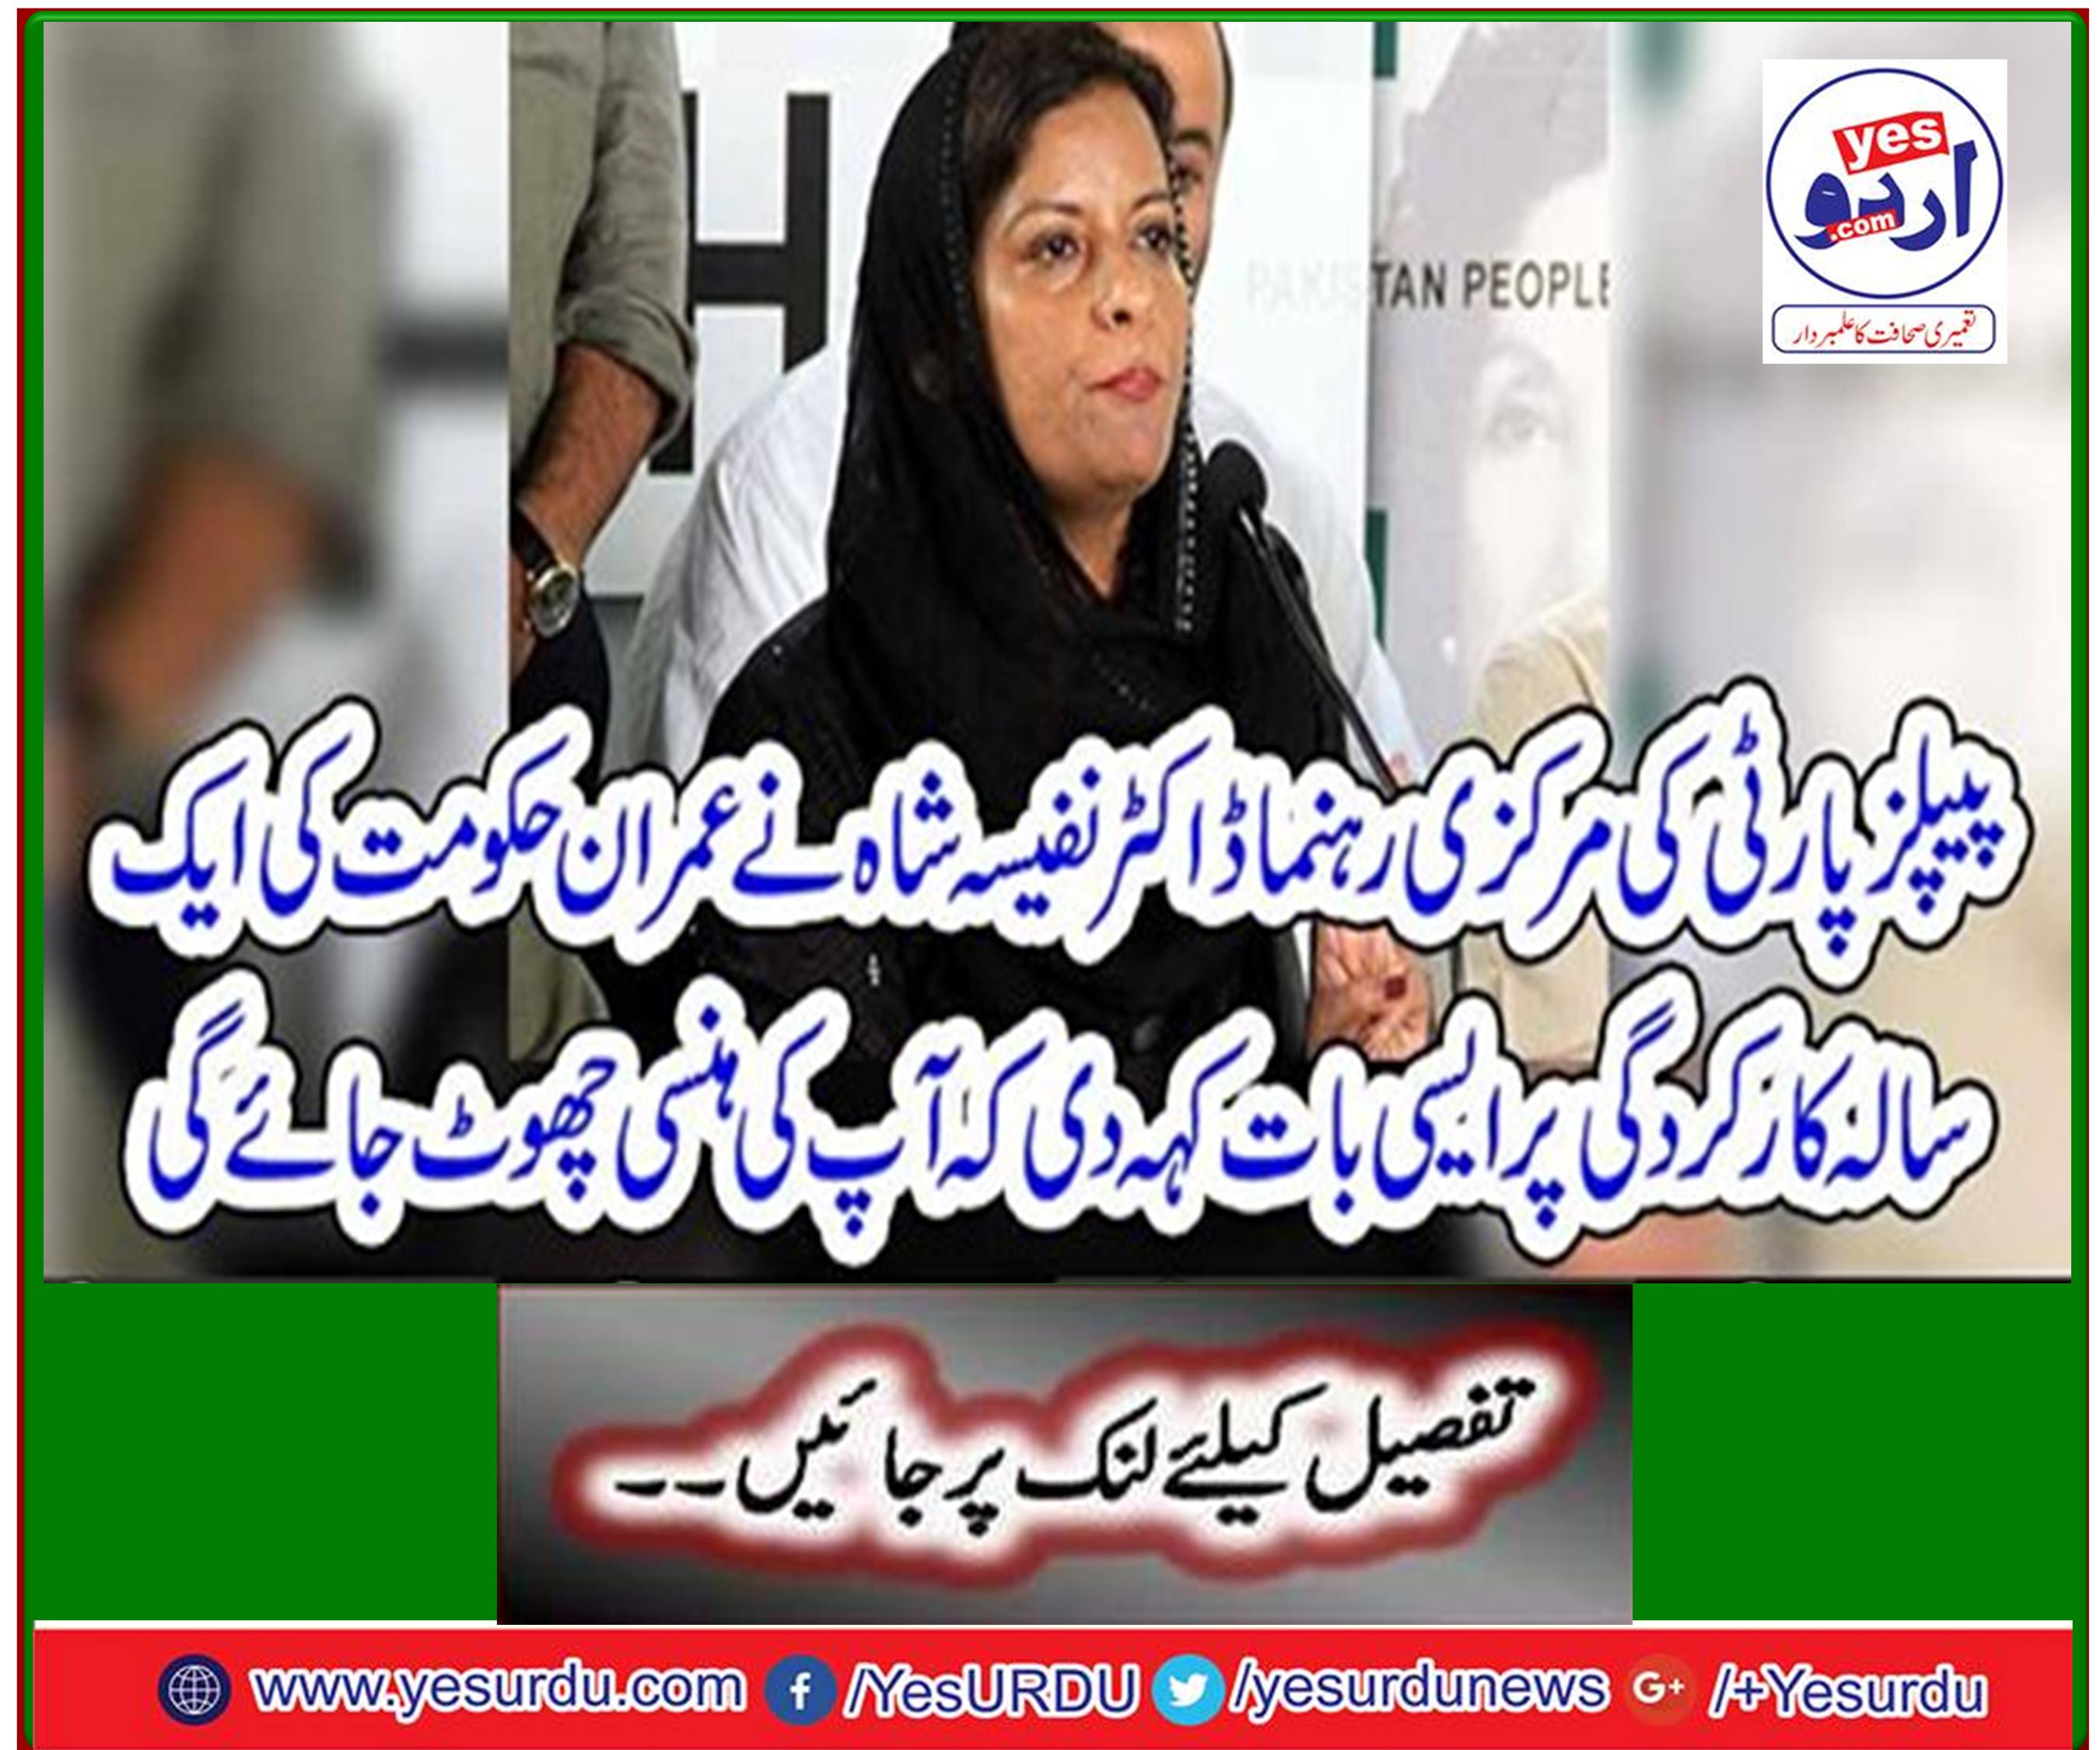 The PPP's central leader, Dr. Ranfisa Shah, has said something about the one-year performance of the Imran government that will make you laugh.